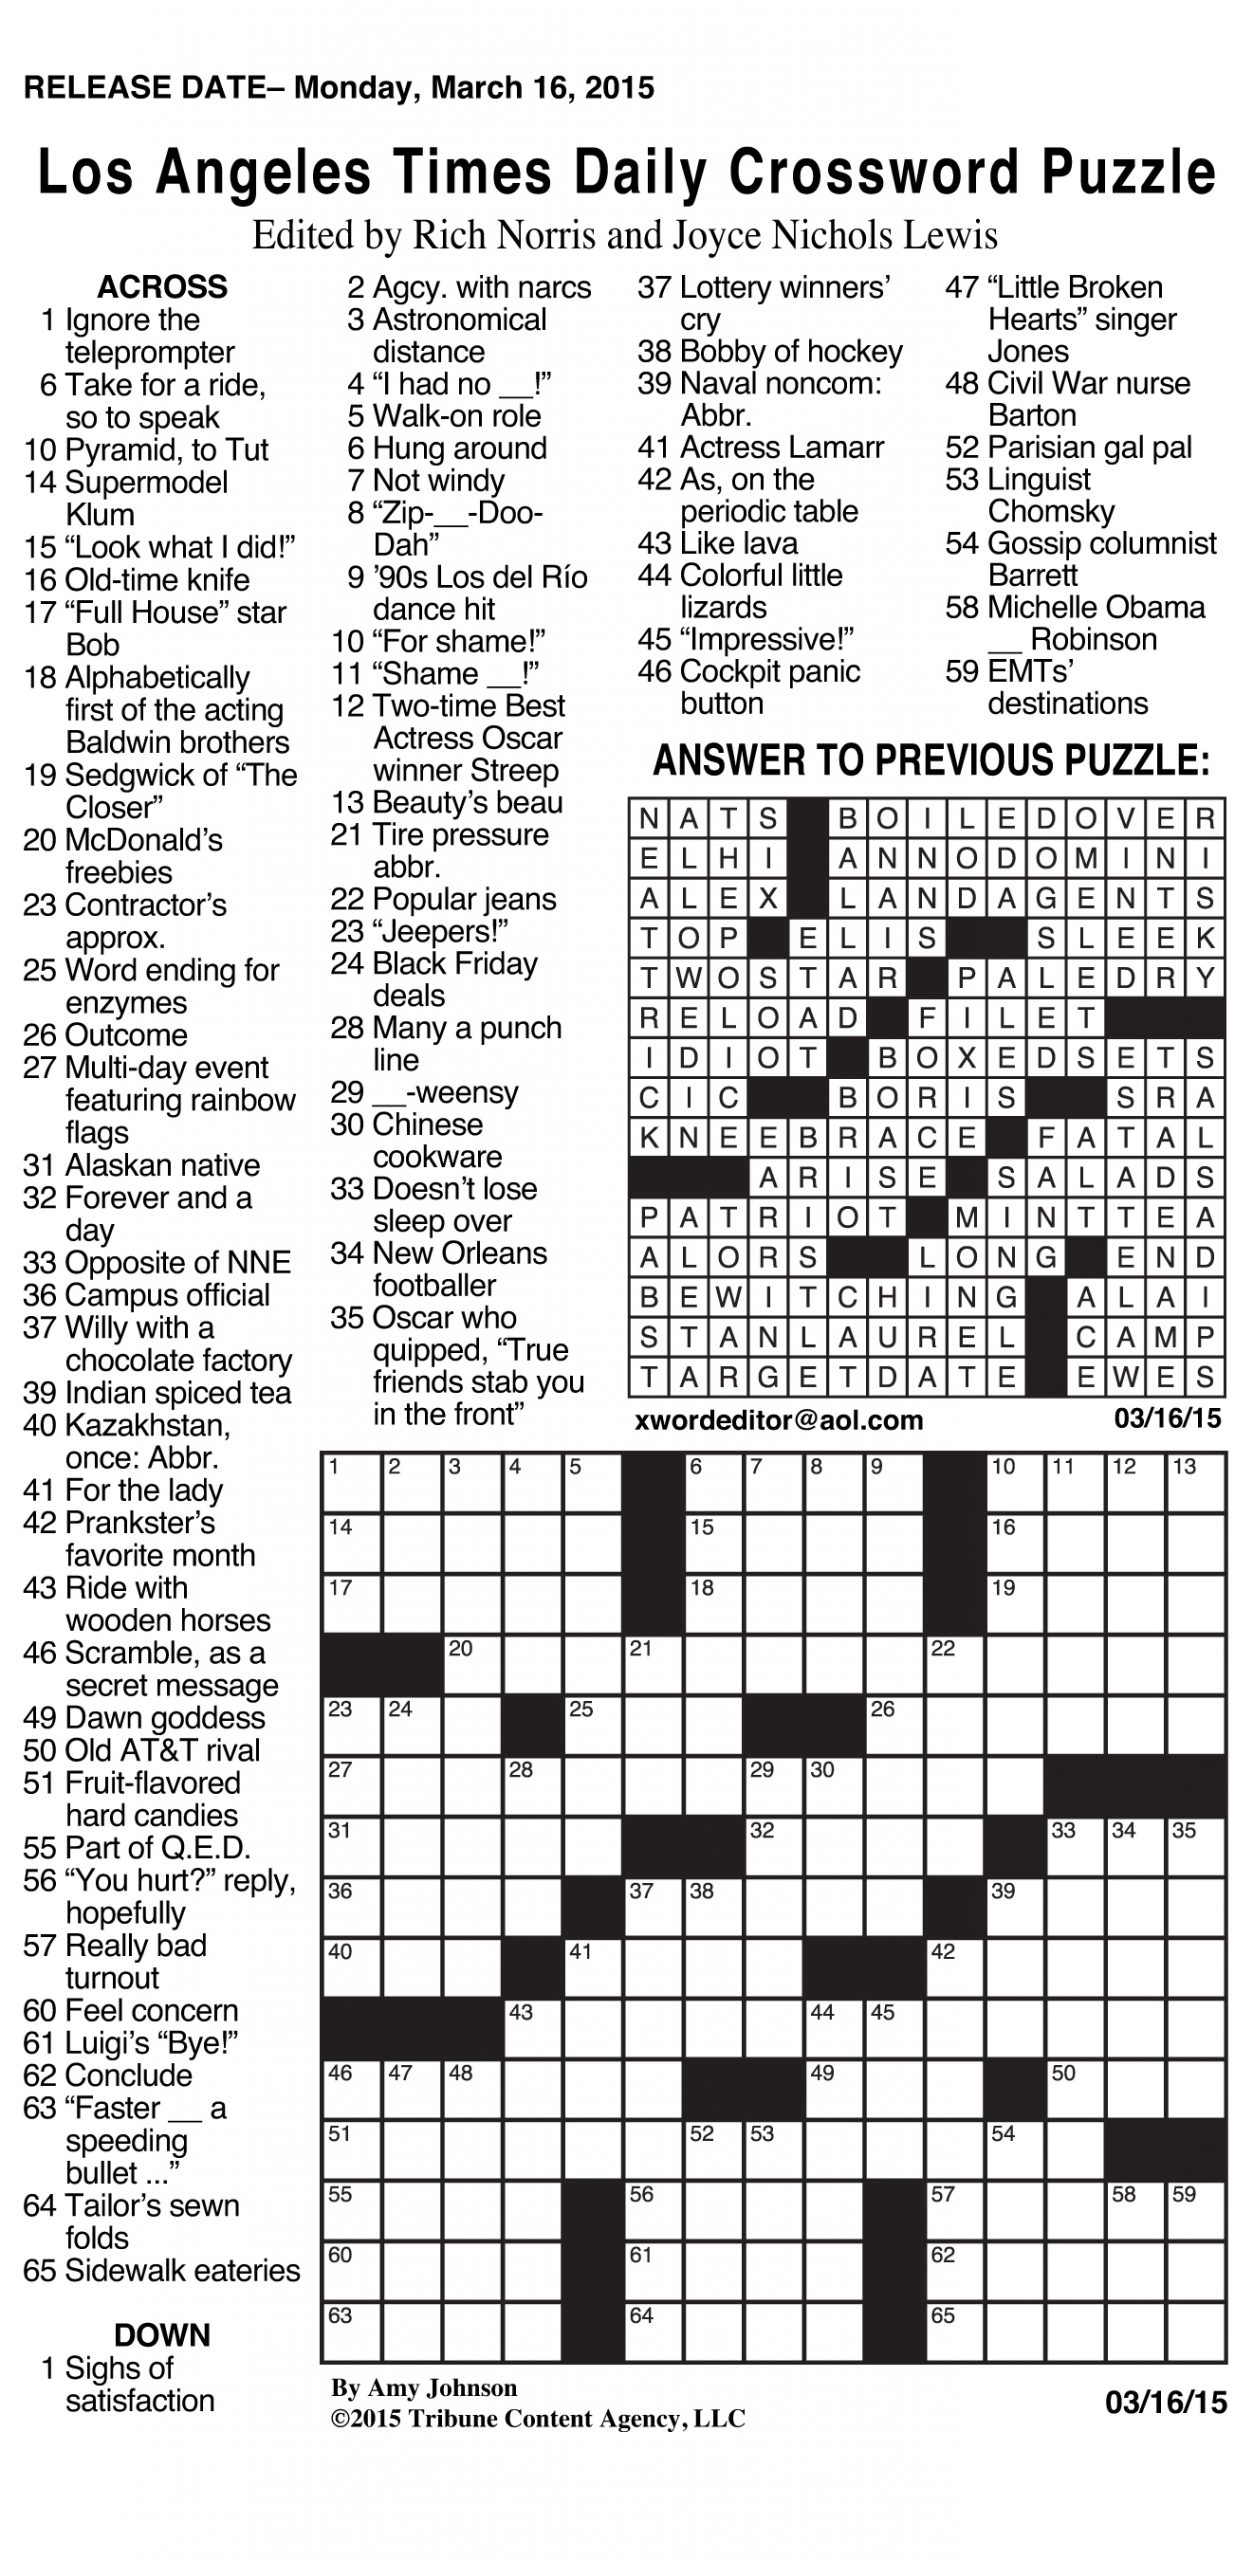 Sample Of Los Angeles Times Daily Crossword Puzzle | Tribune